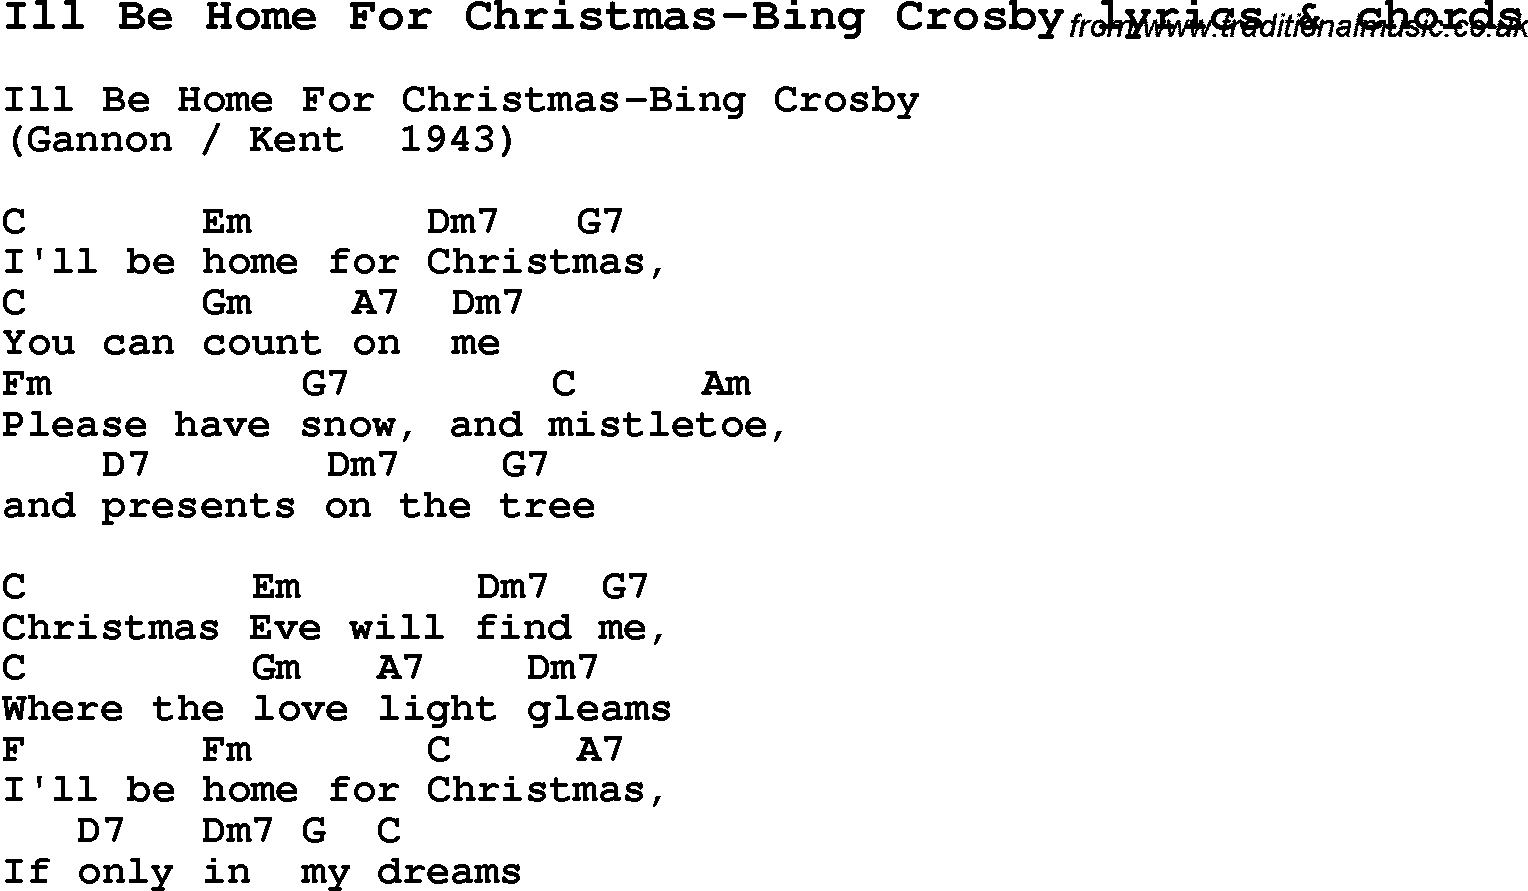 Love Song Lyrics for: Ill Be Home For Christmas-Bing Crosby with chords for Ukulele, Guitar Banjo etc.